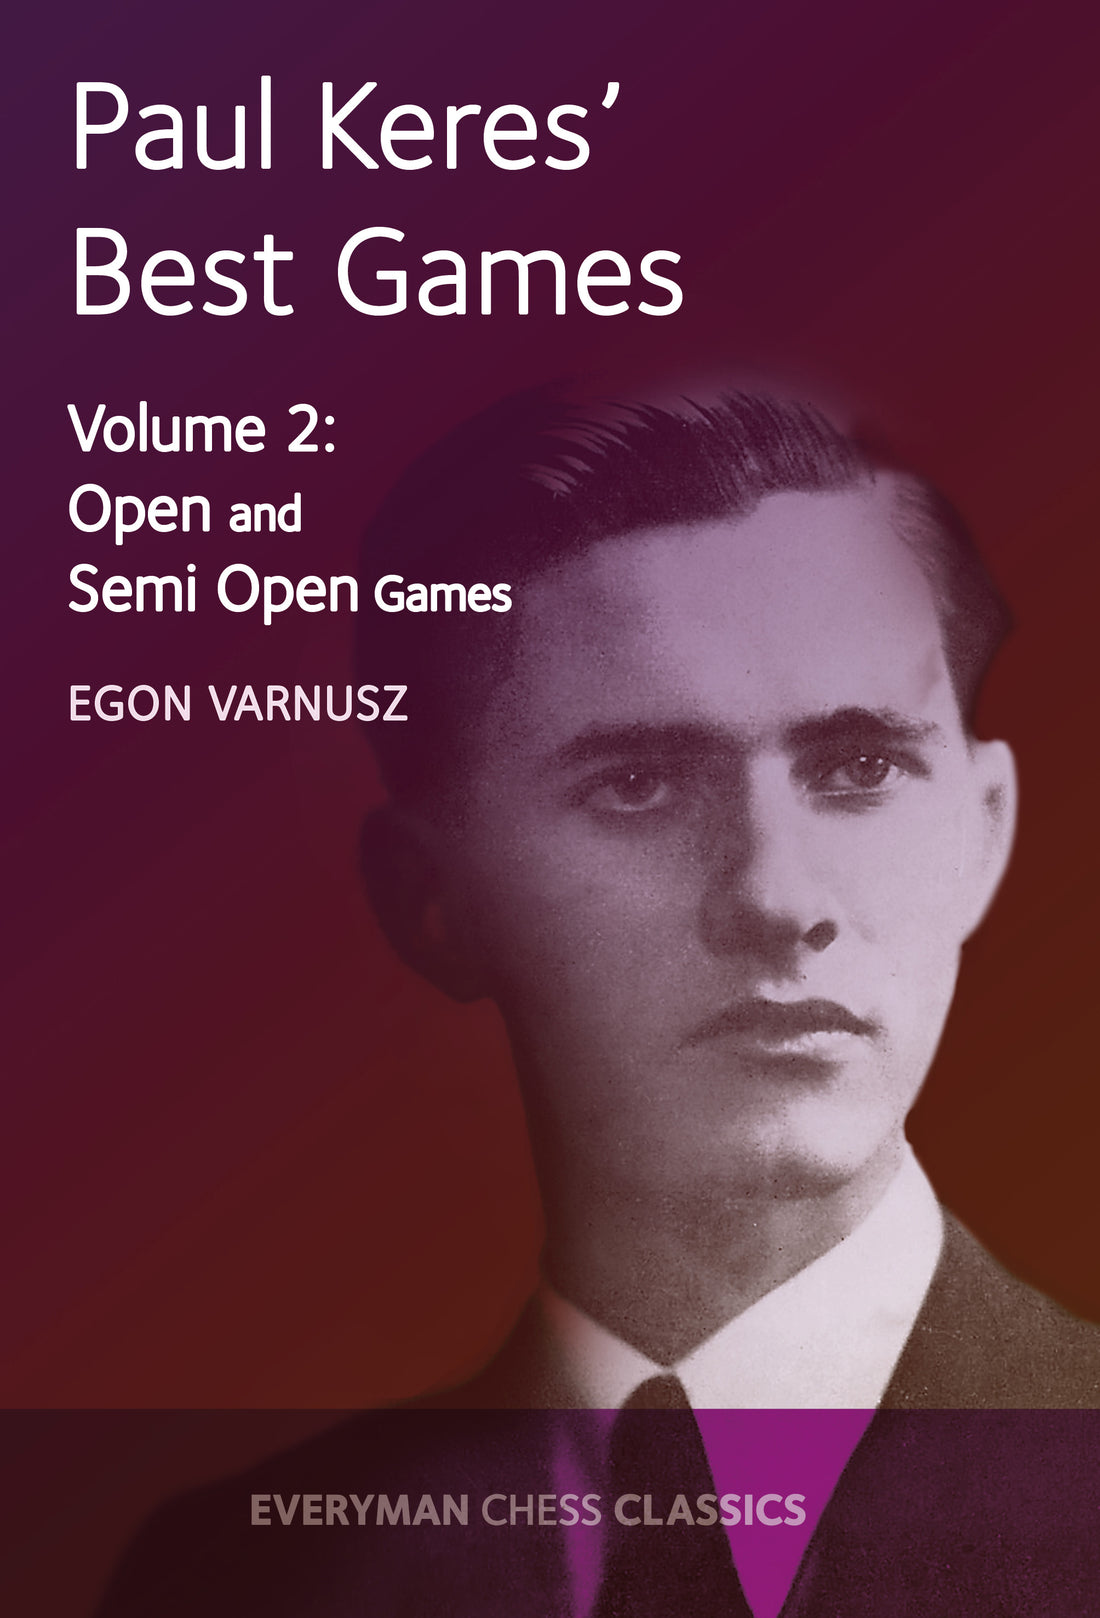 Paul Keres Best Games Volume 2 front cover